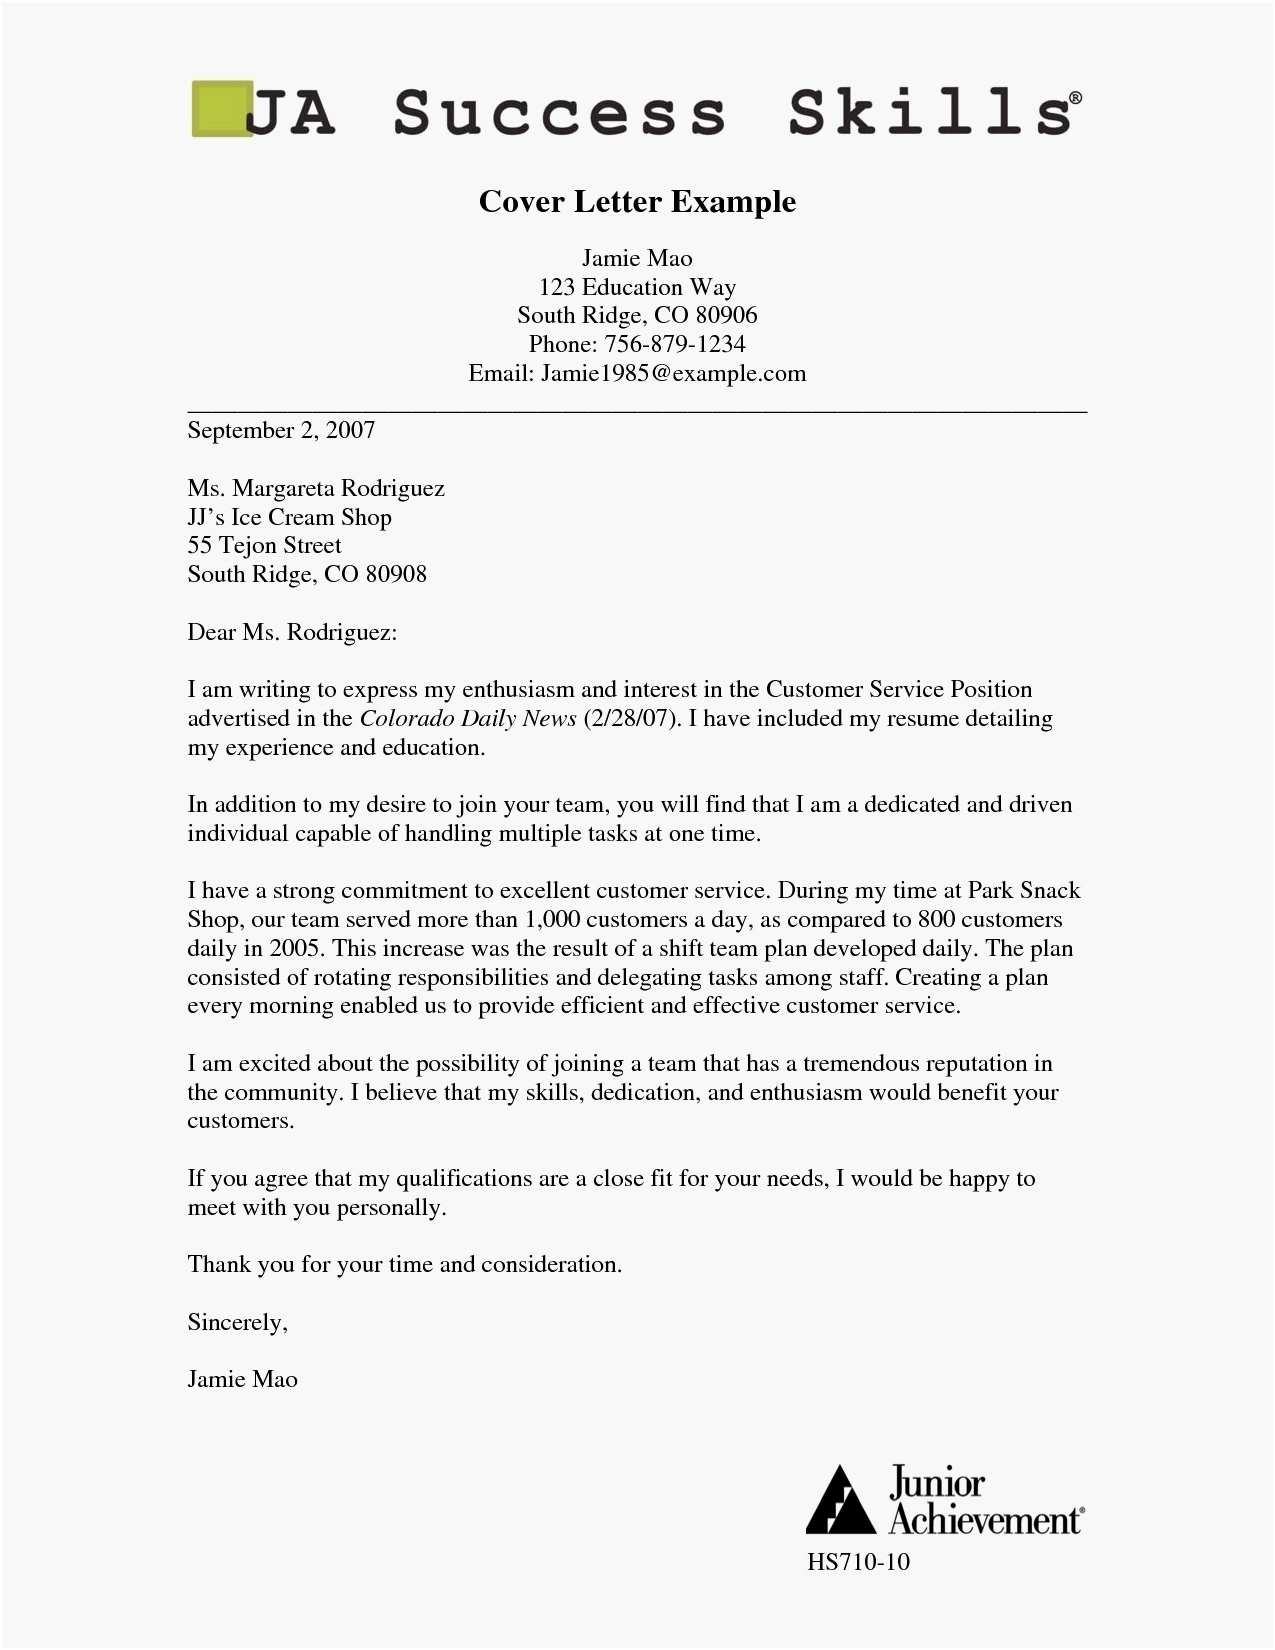 Cover Letter Template for Job Application - Letter format for Cover Letter Sample Cover Letter Employment